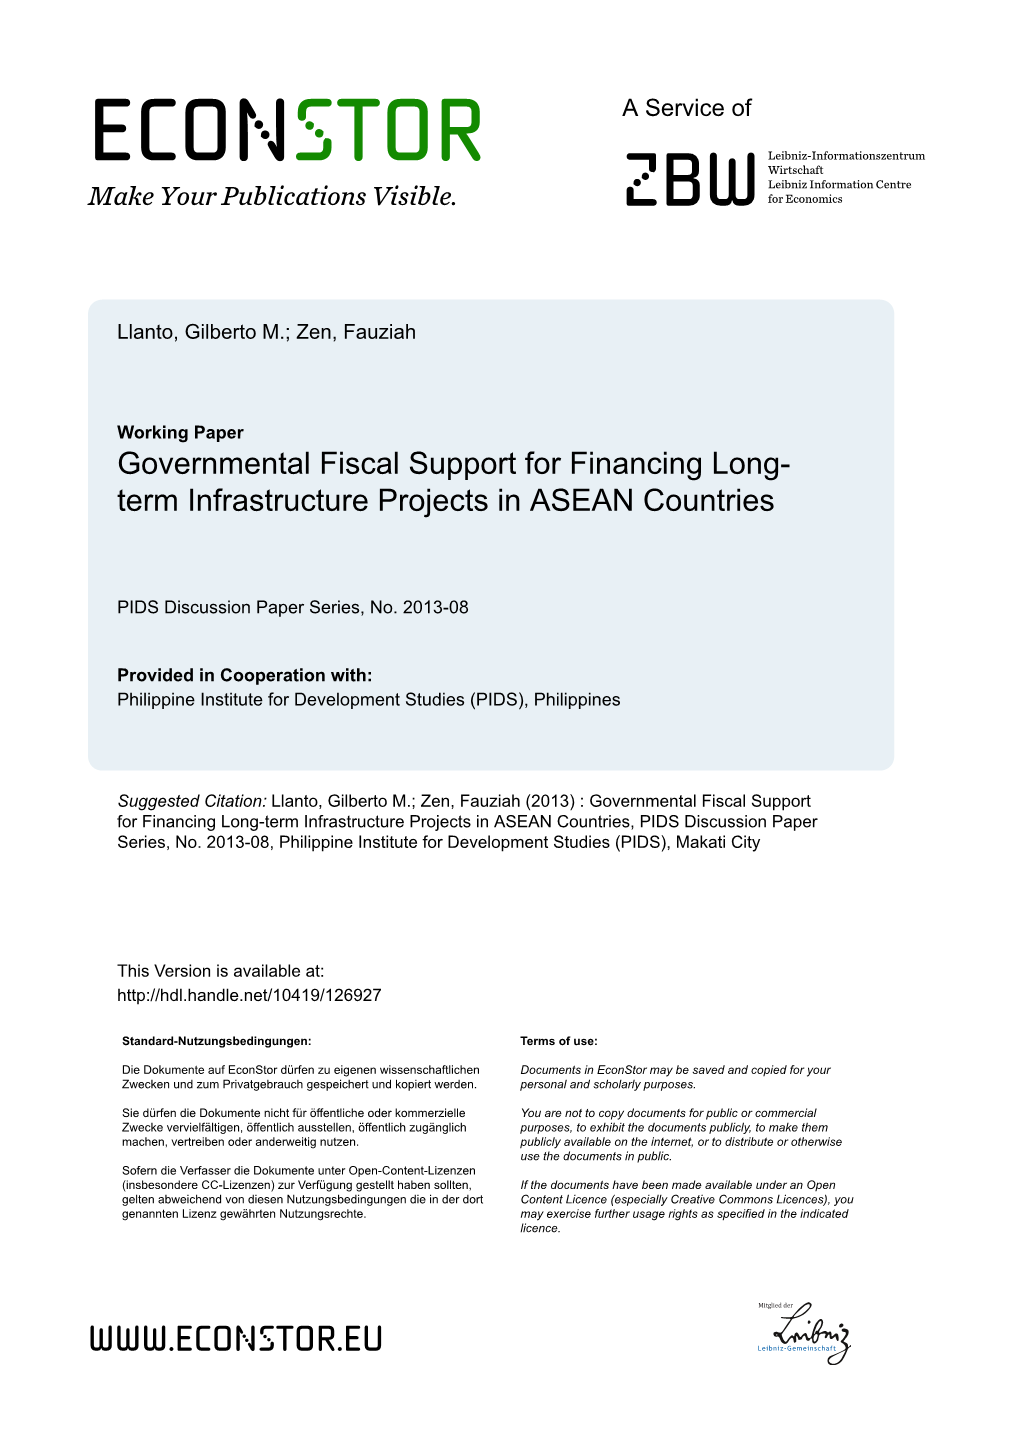 Governmental Fiscal Support for Financing Long-Term Infrastructure Projects in ASEAN Countries, PIDS Discussion Paper Series, No